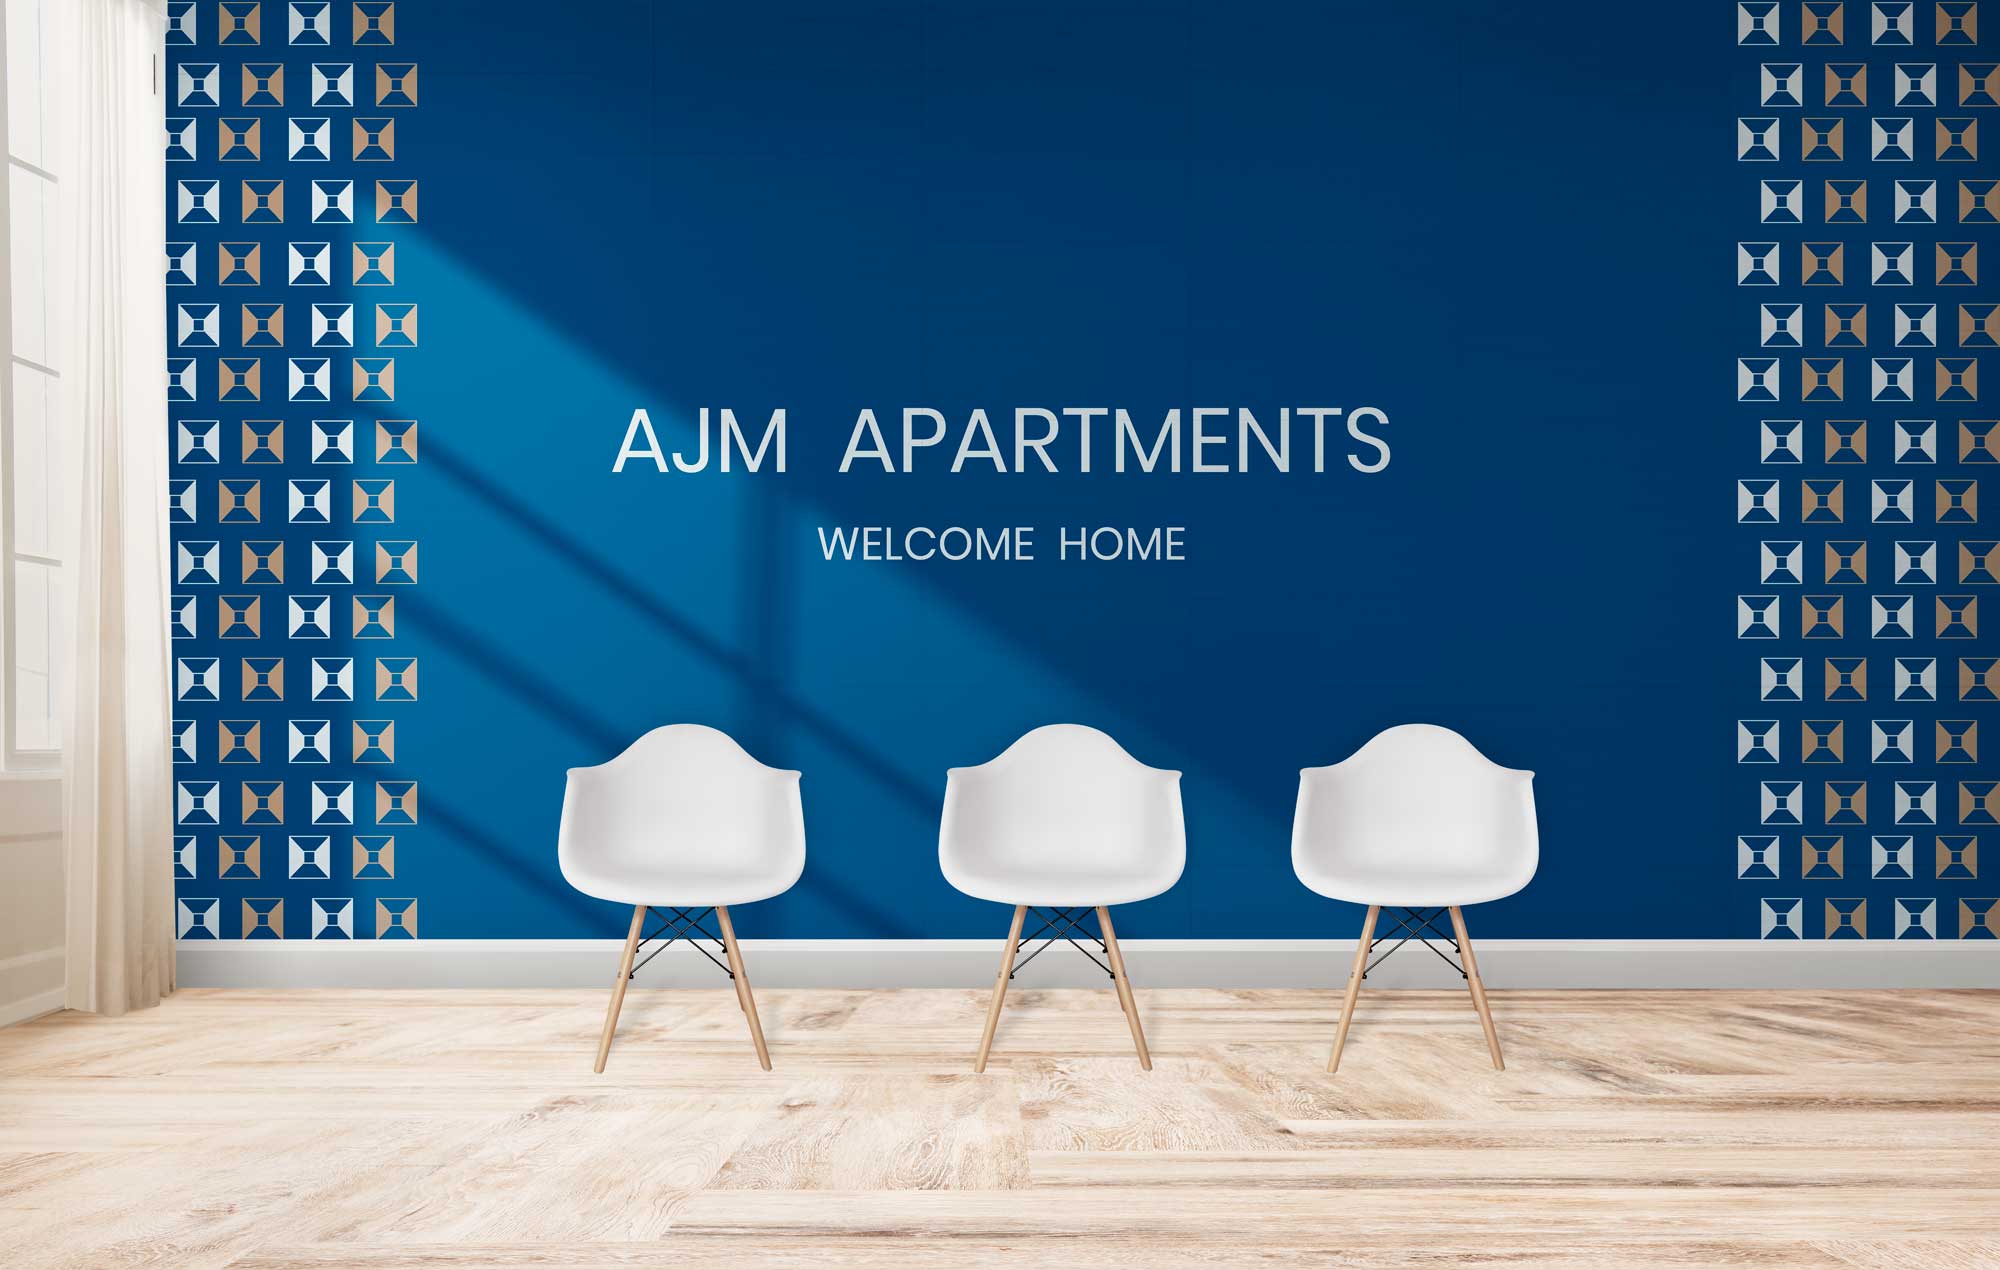 Mural wall for AJM Apartments